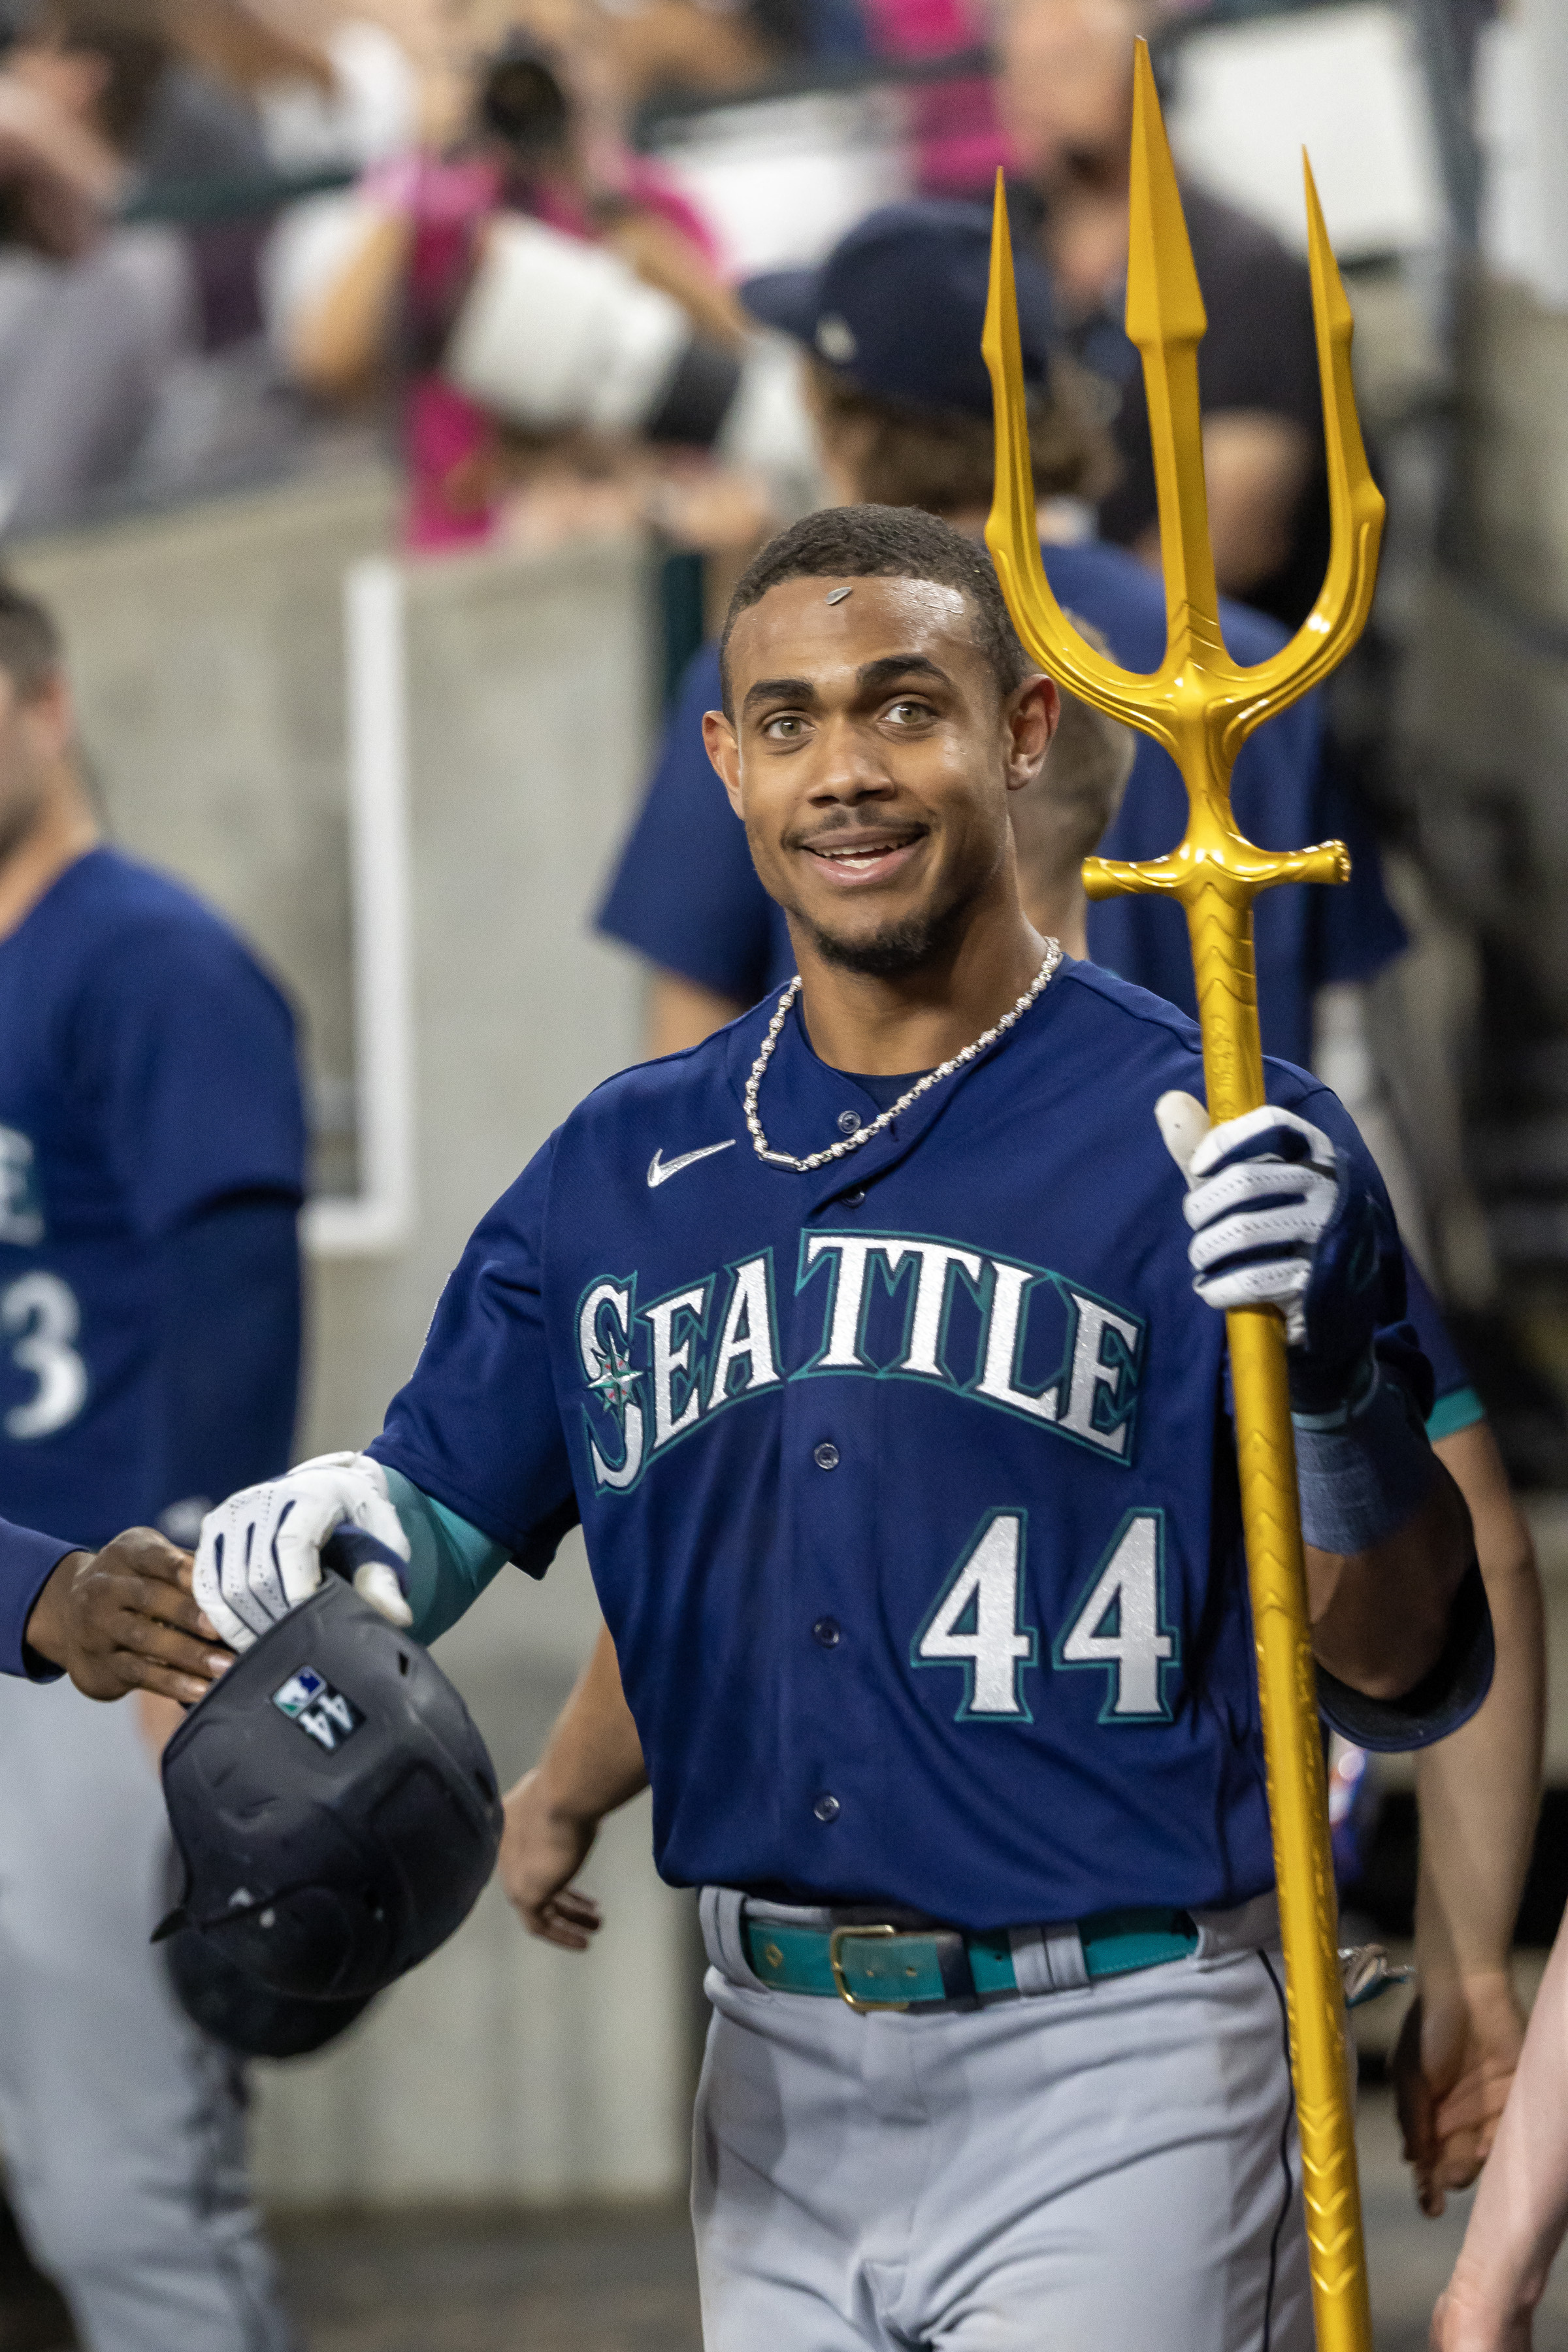 The Seattle Mariners HOME RUN TRIDENT!! 